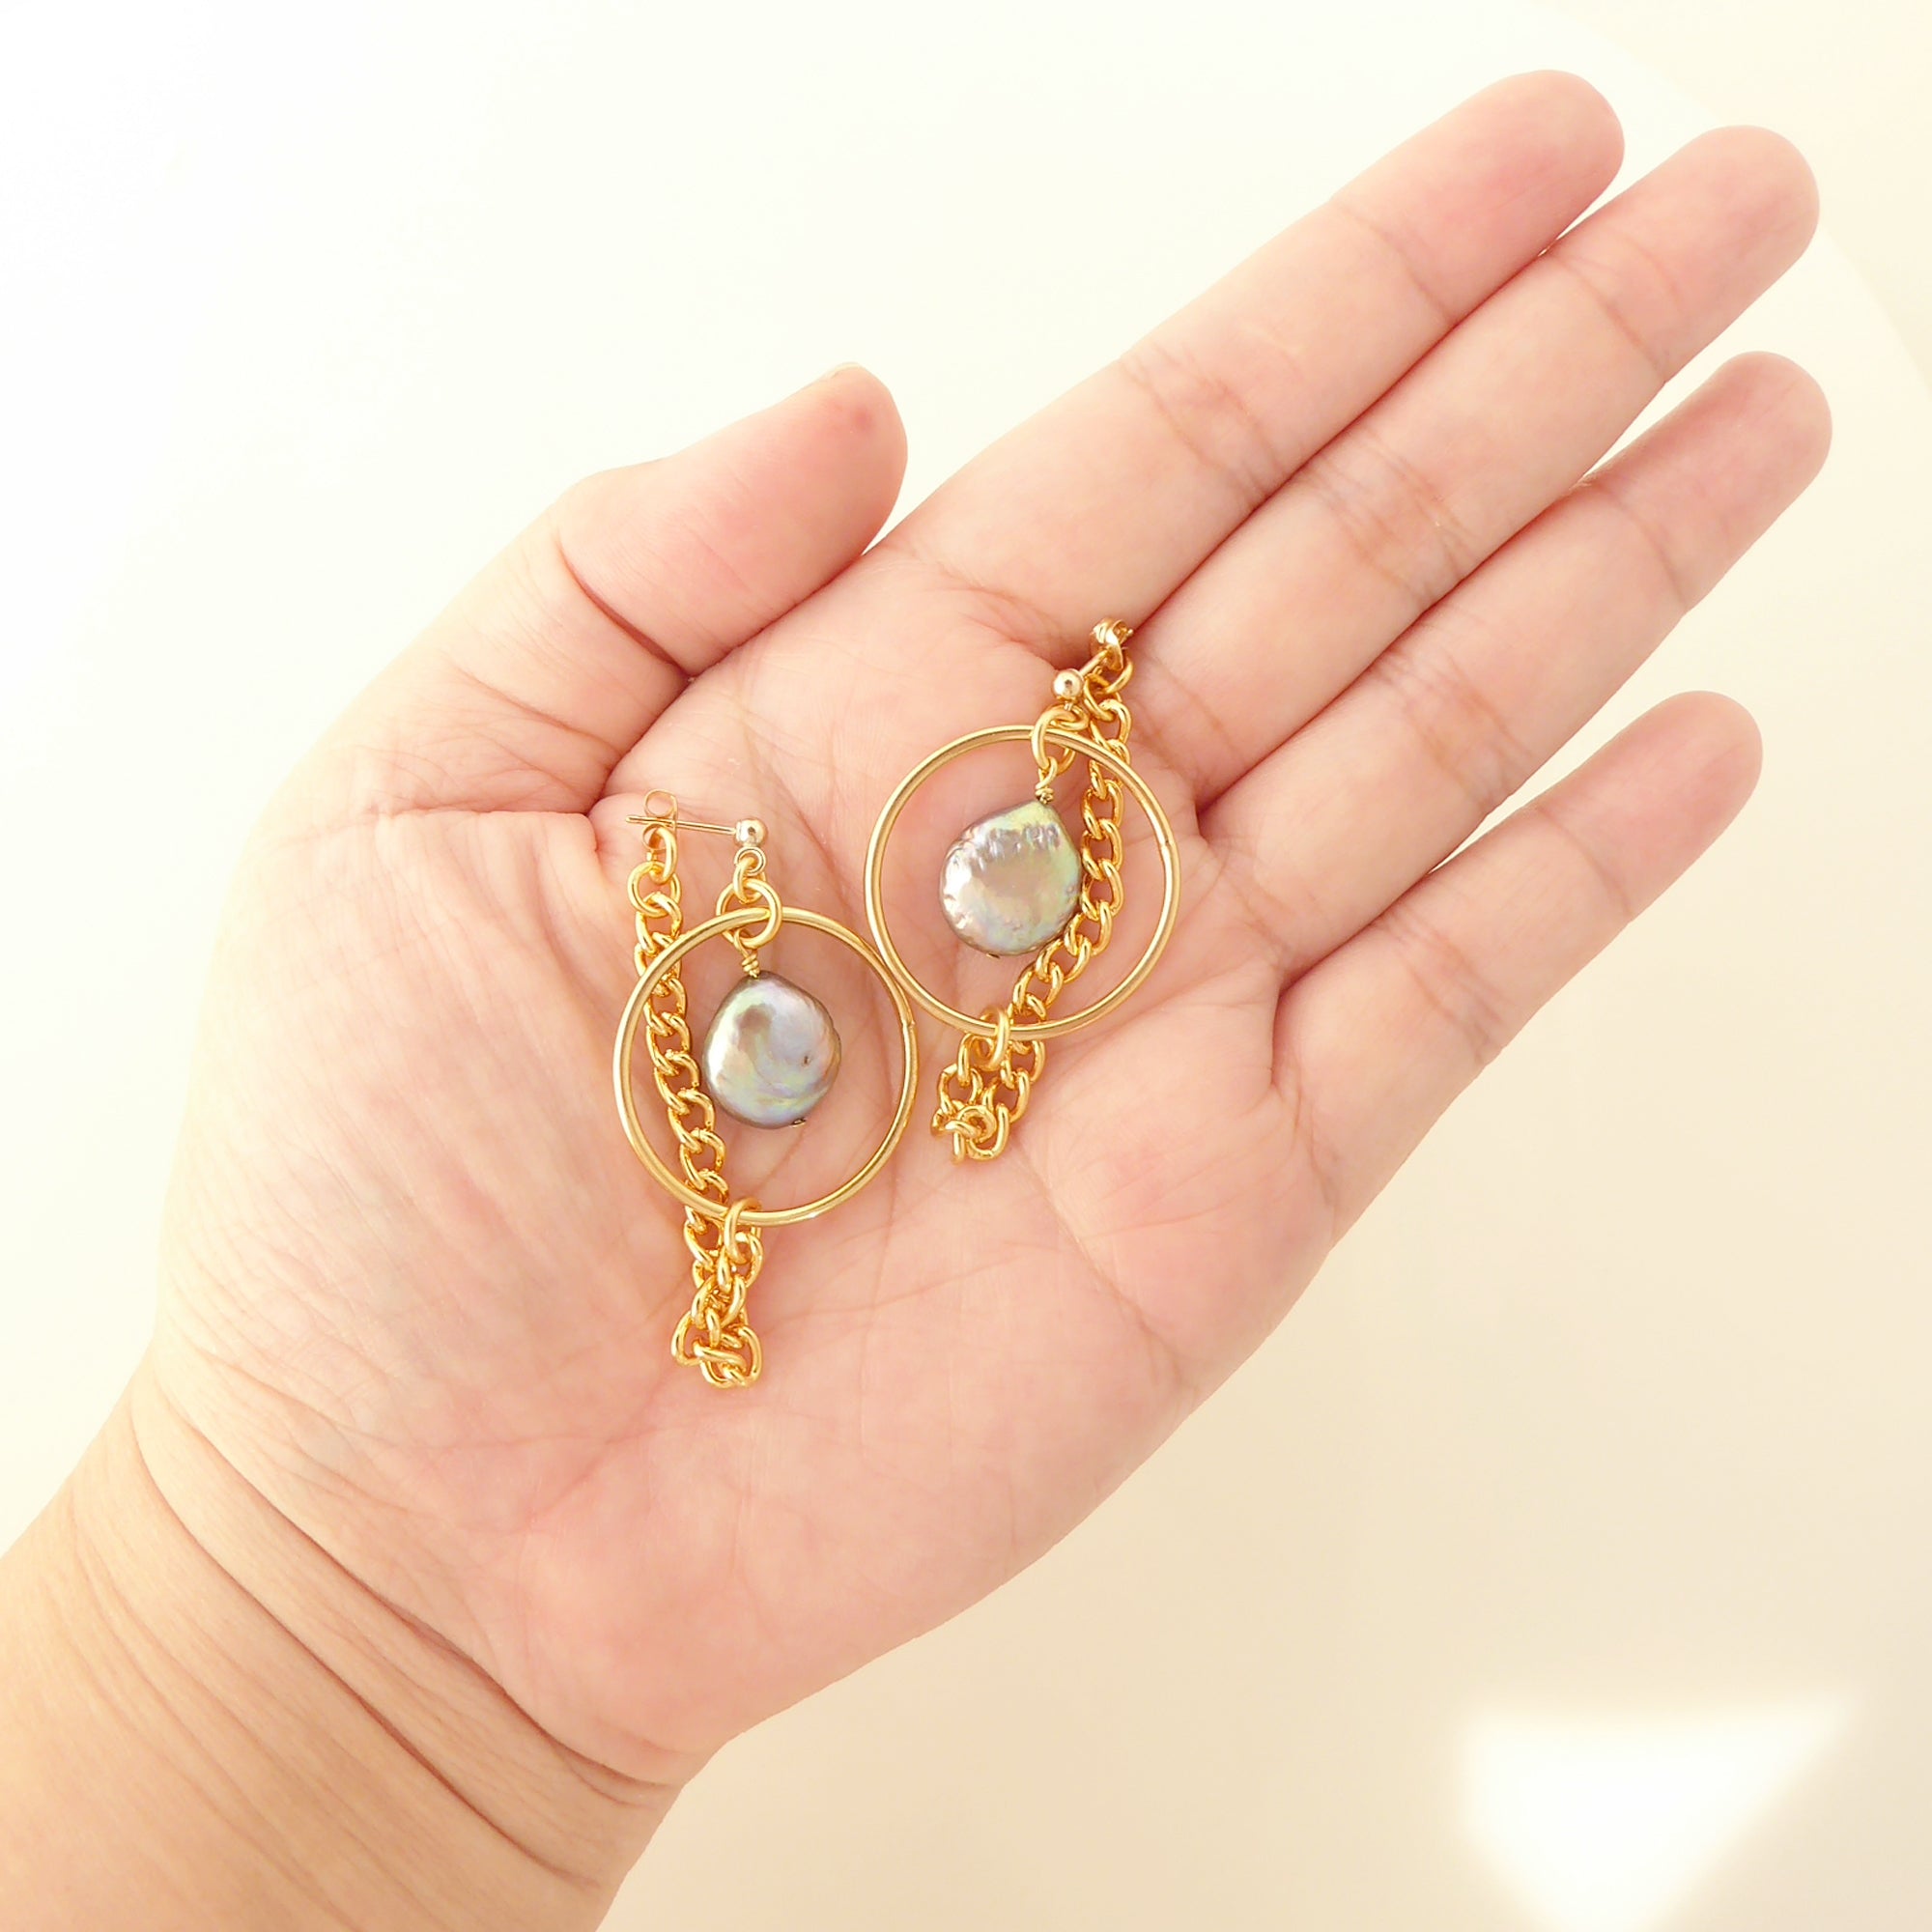 Gold saturn earrings in gray pearl by Jenny Dayco 5